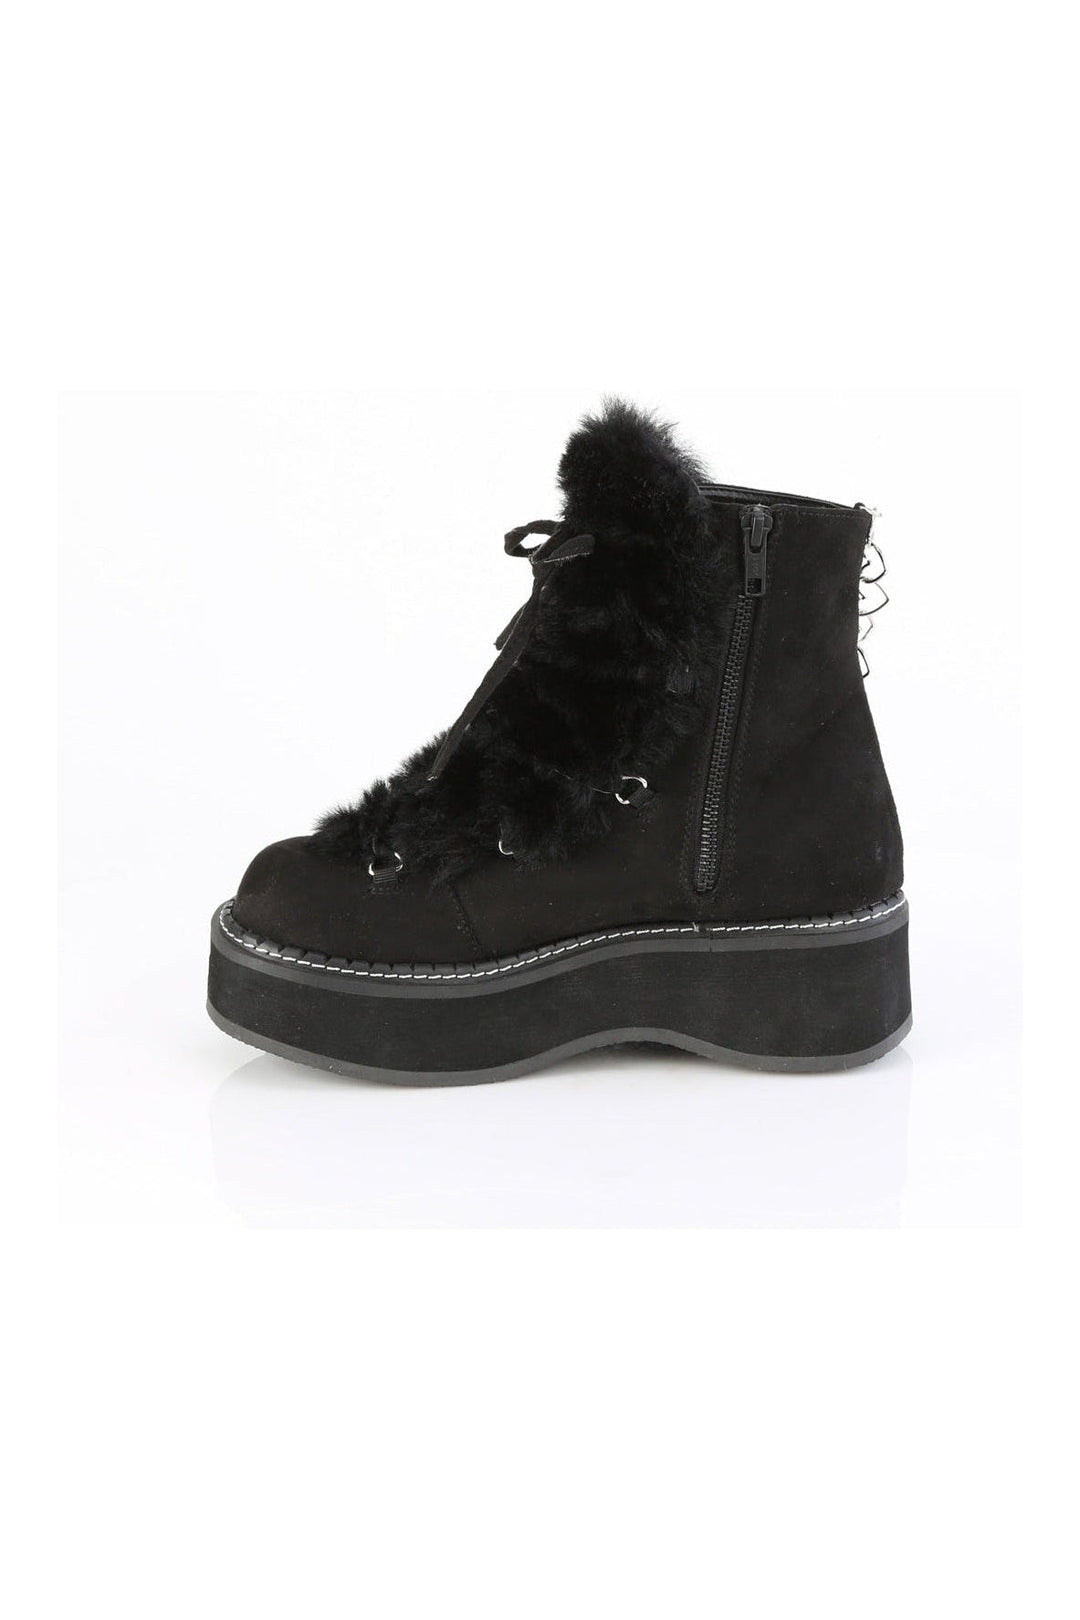 EMILY-55 Black Vegan Suede Ankle Boot